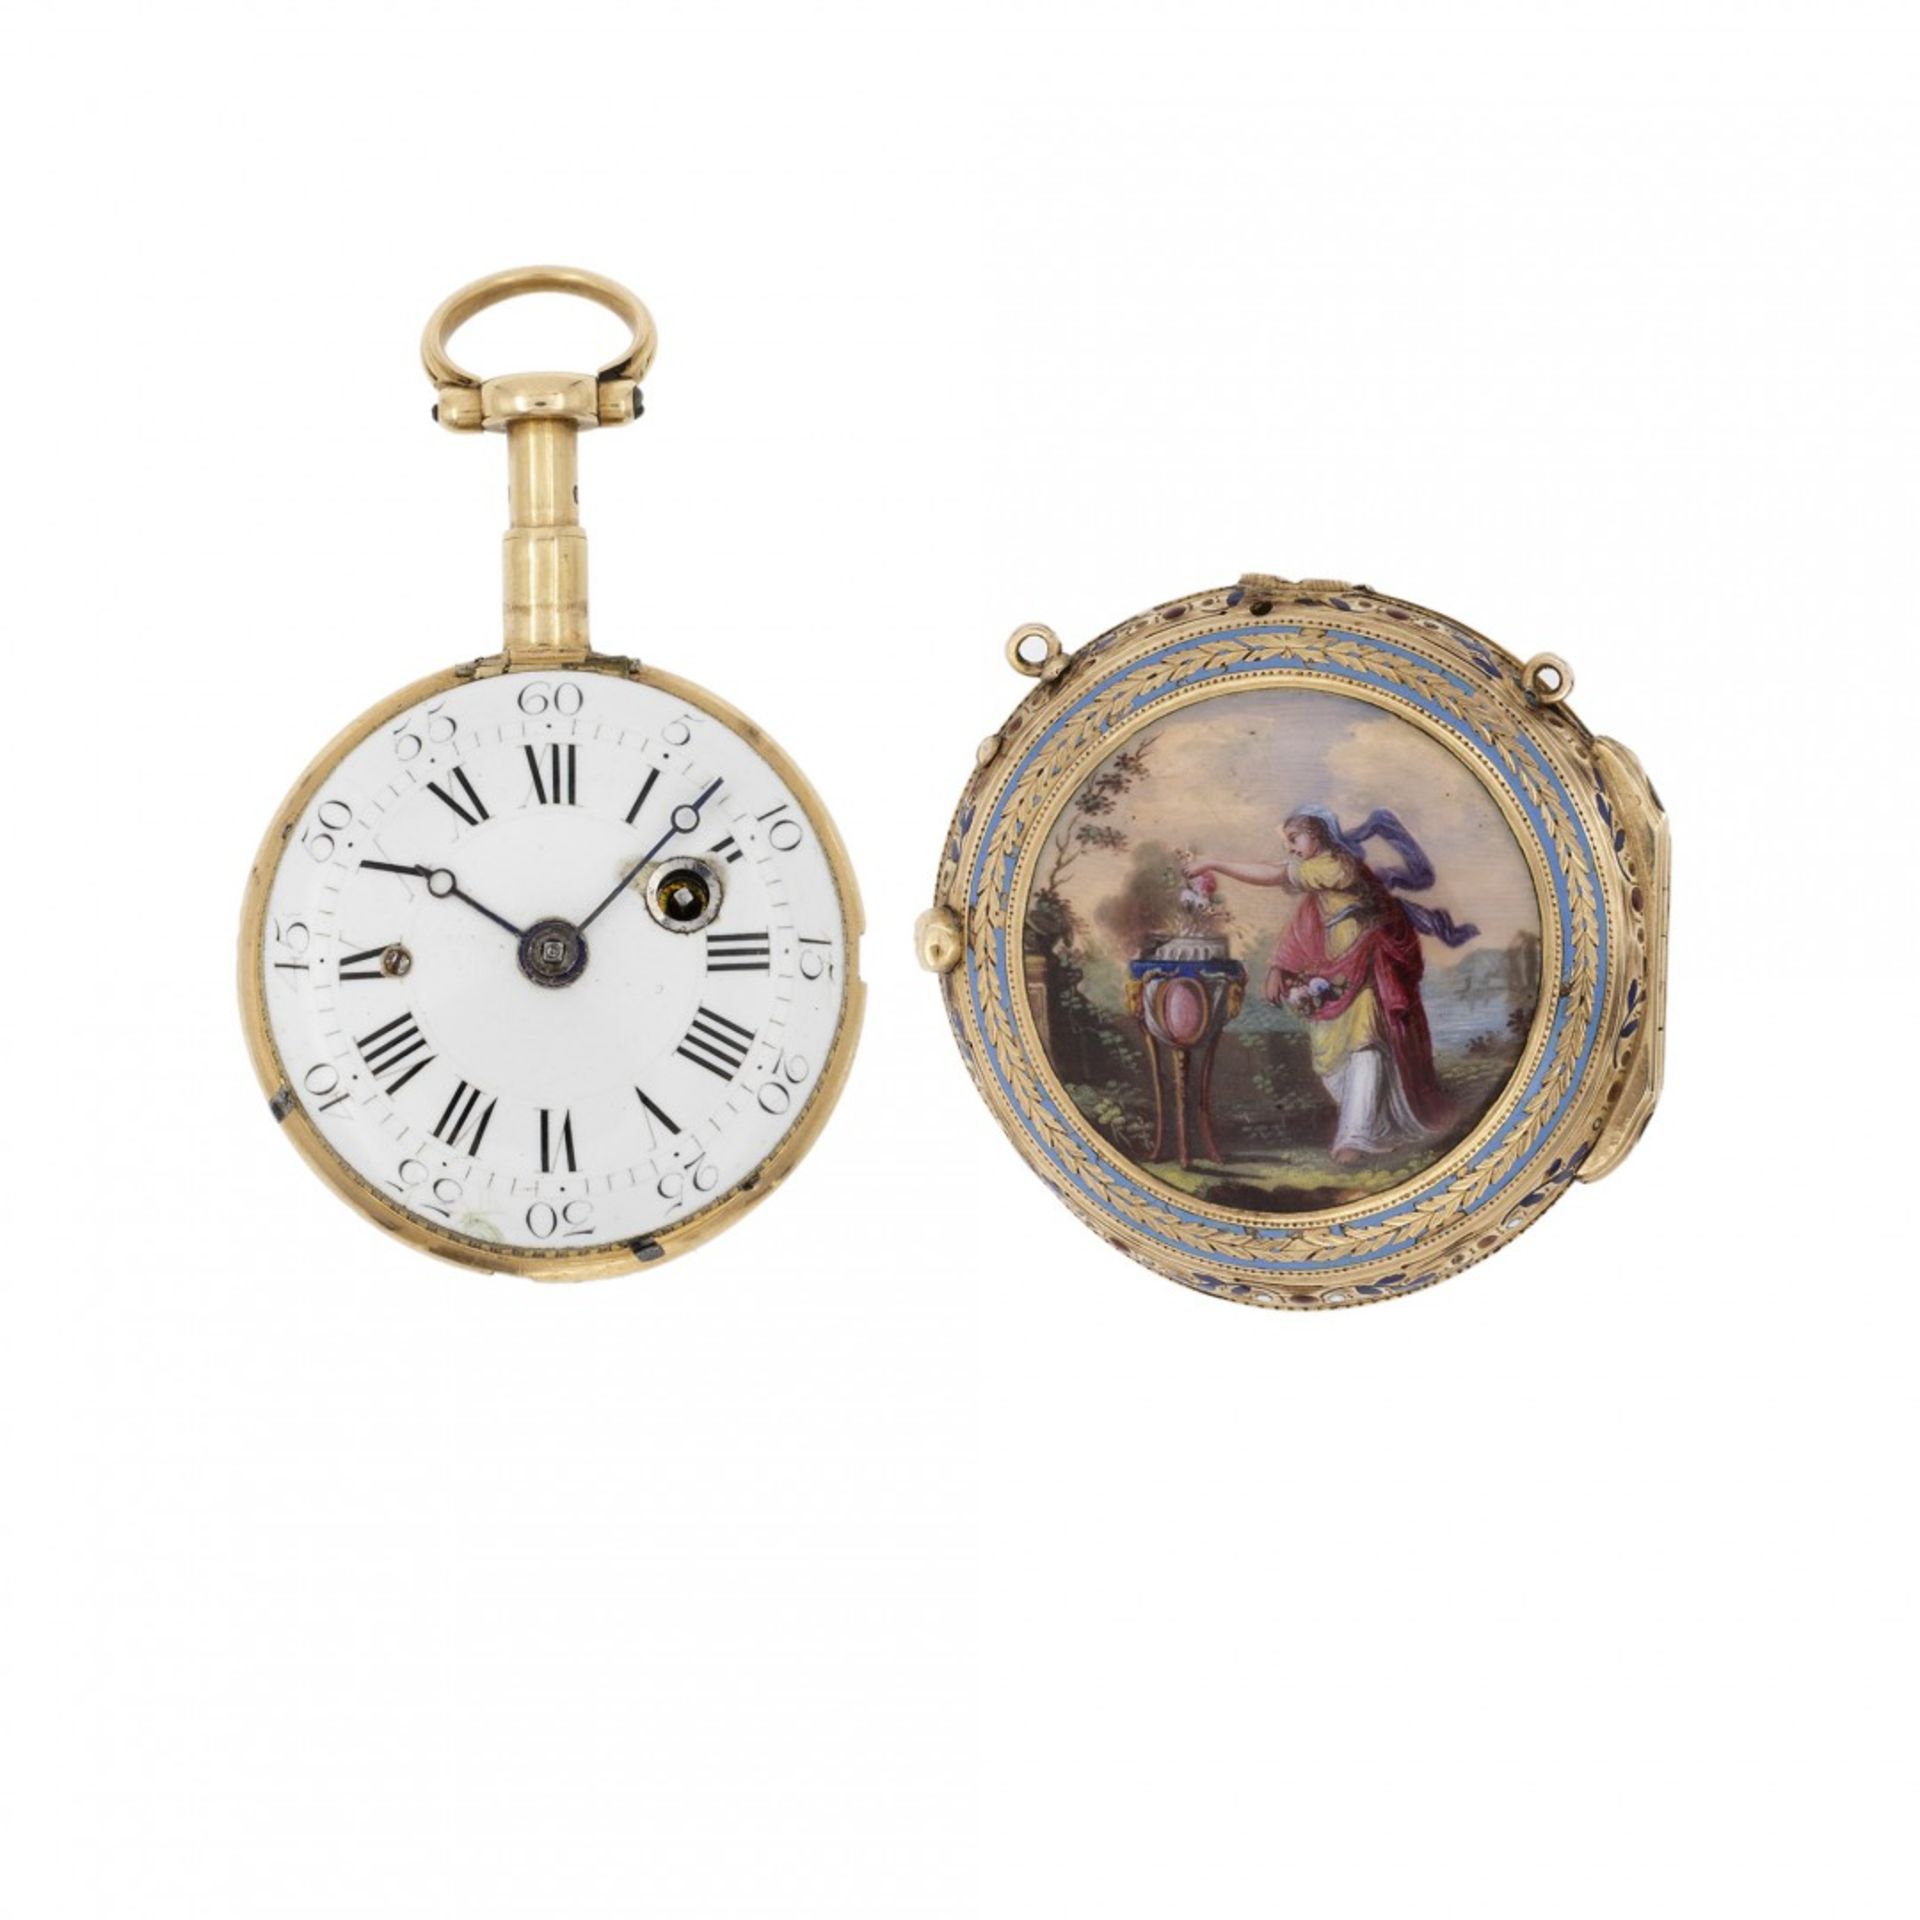 SMALL REPEATER MOVEMENT AND ENAMELED CASEBACK, CIRCA 1780